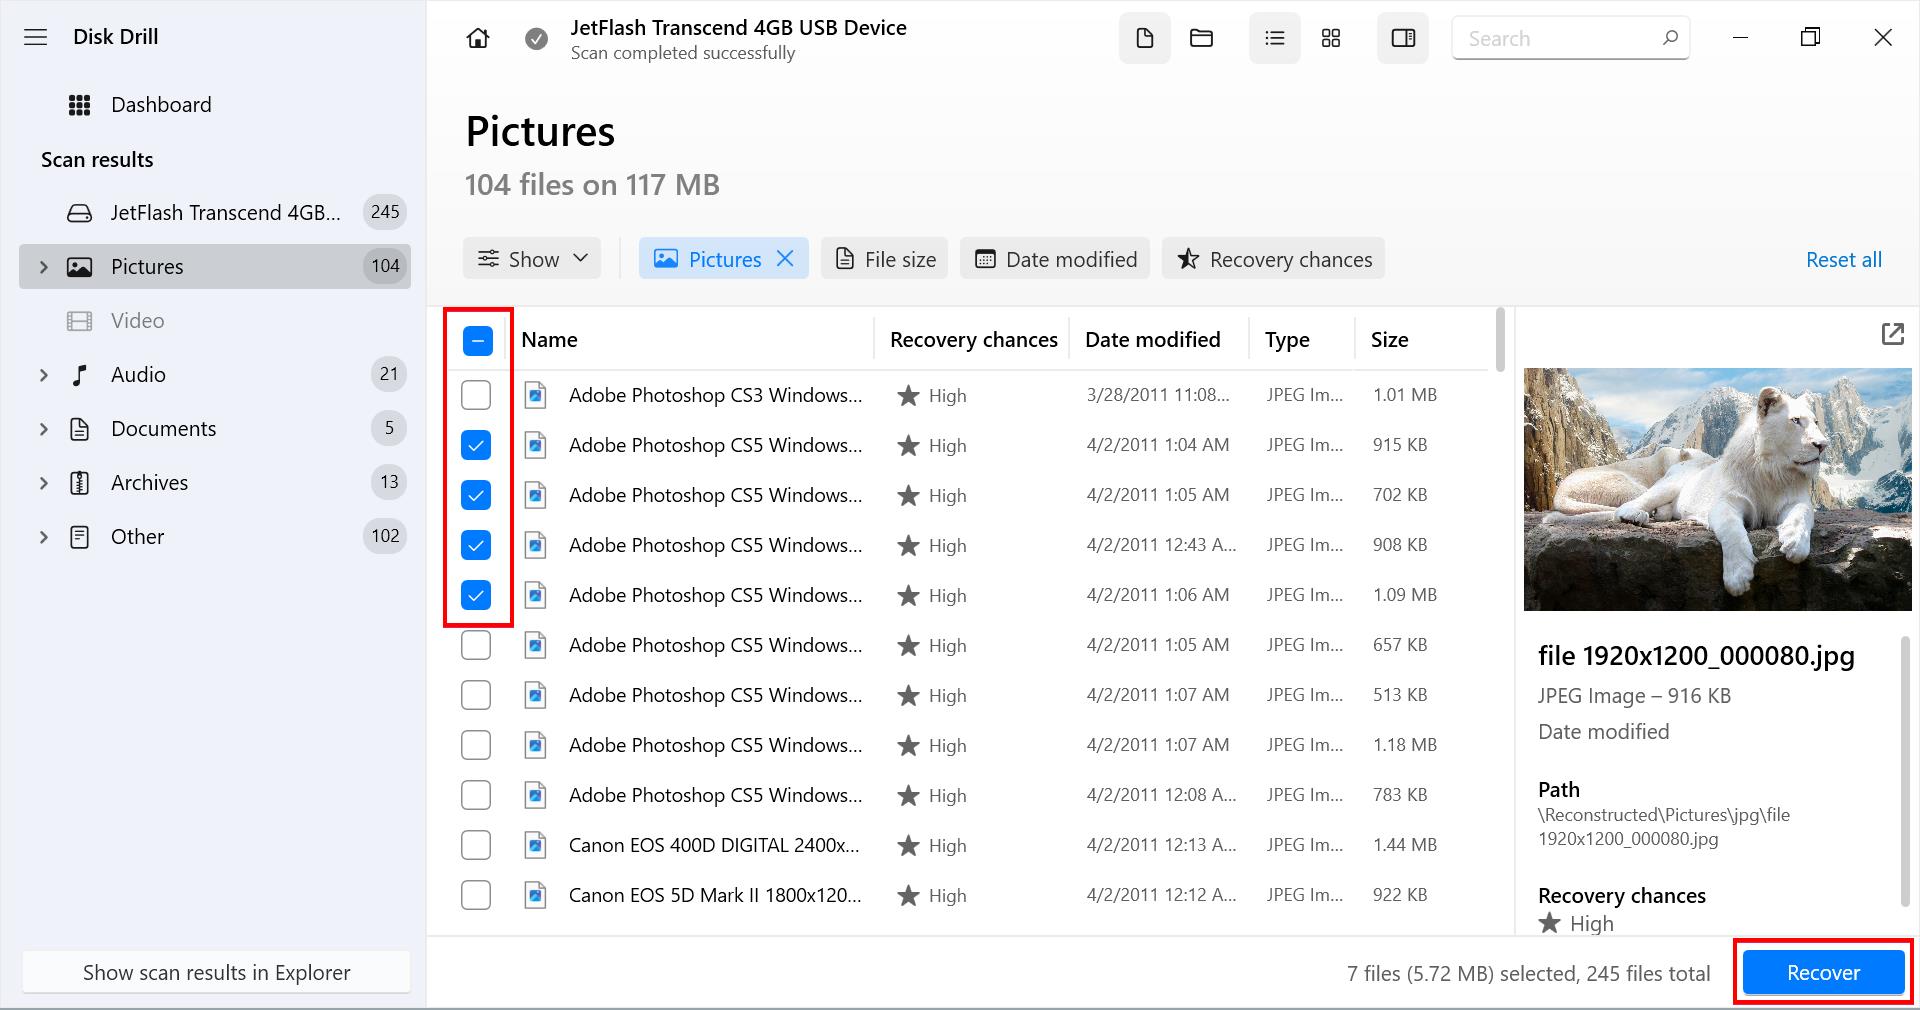 recover files from transcend usb drive